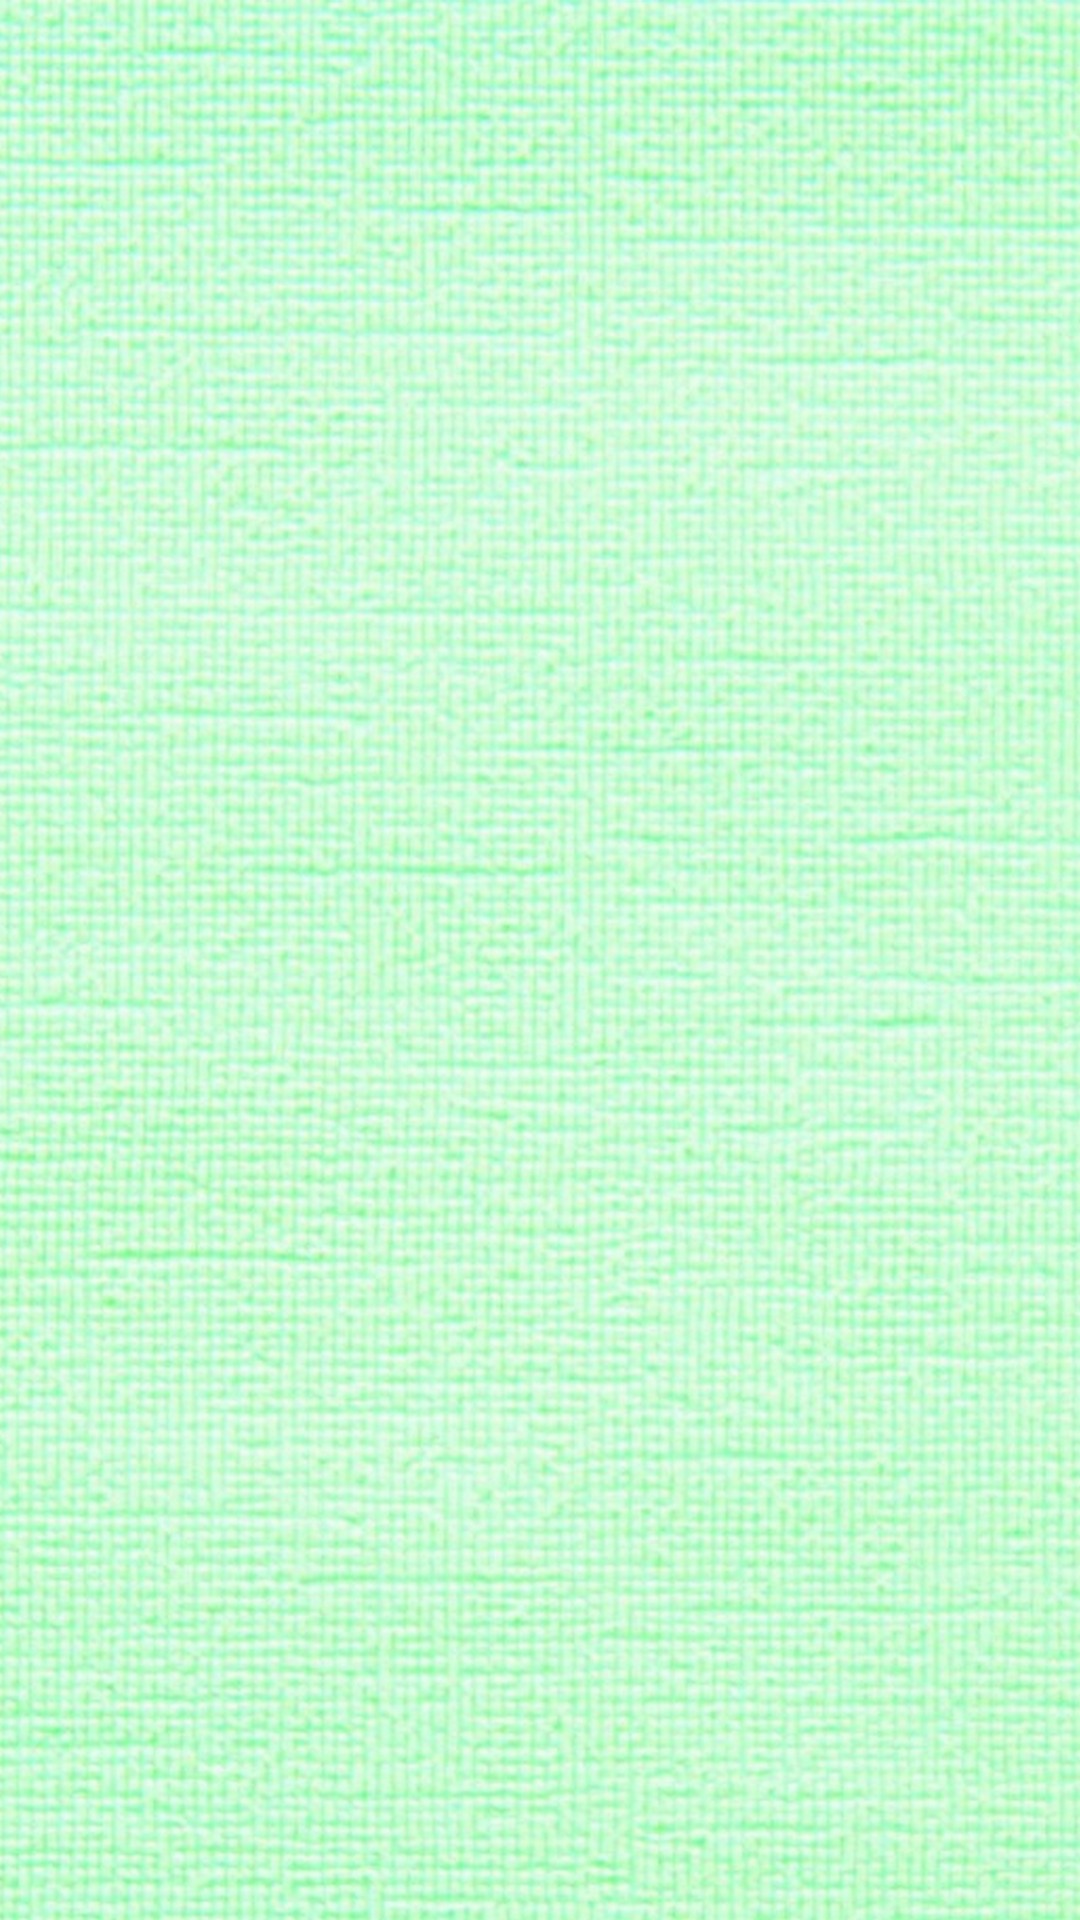 Wallpaper iPhone Mint Green with image resolution 1080x1920 pixel. You can make this wallpaper for your iPhone 5, 6, 7, 8, X backgrounds, Mobile Screensaver, or iPad Lock Screen